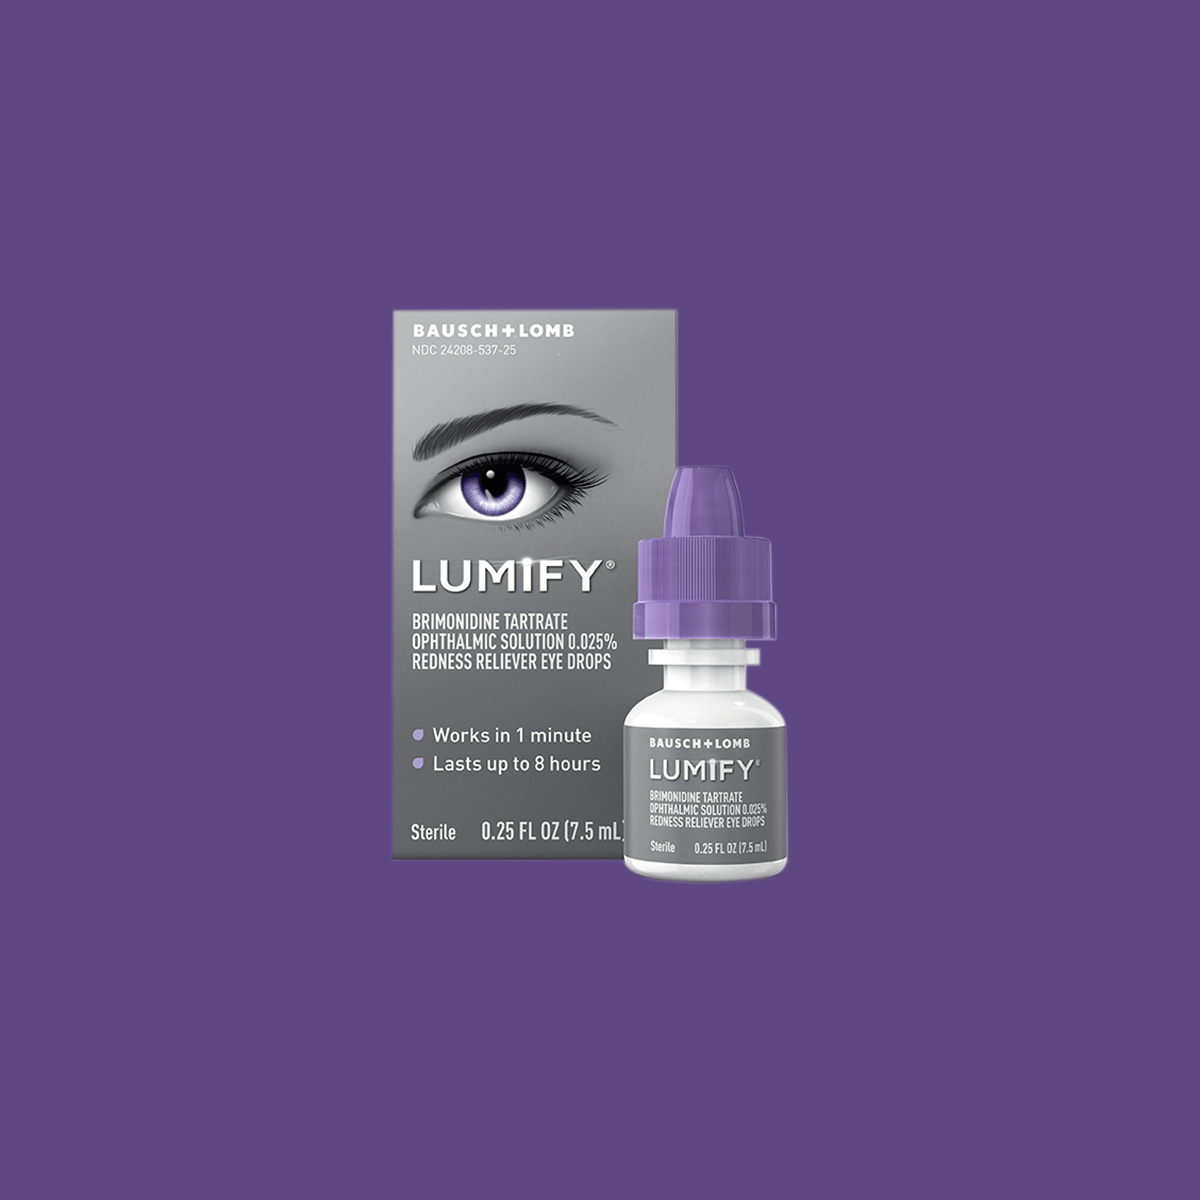 Lumify Eye Drops (1 and 3 Month Supplies) - Dryeye Rescue